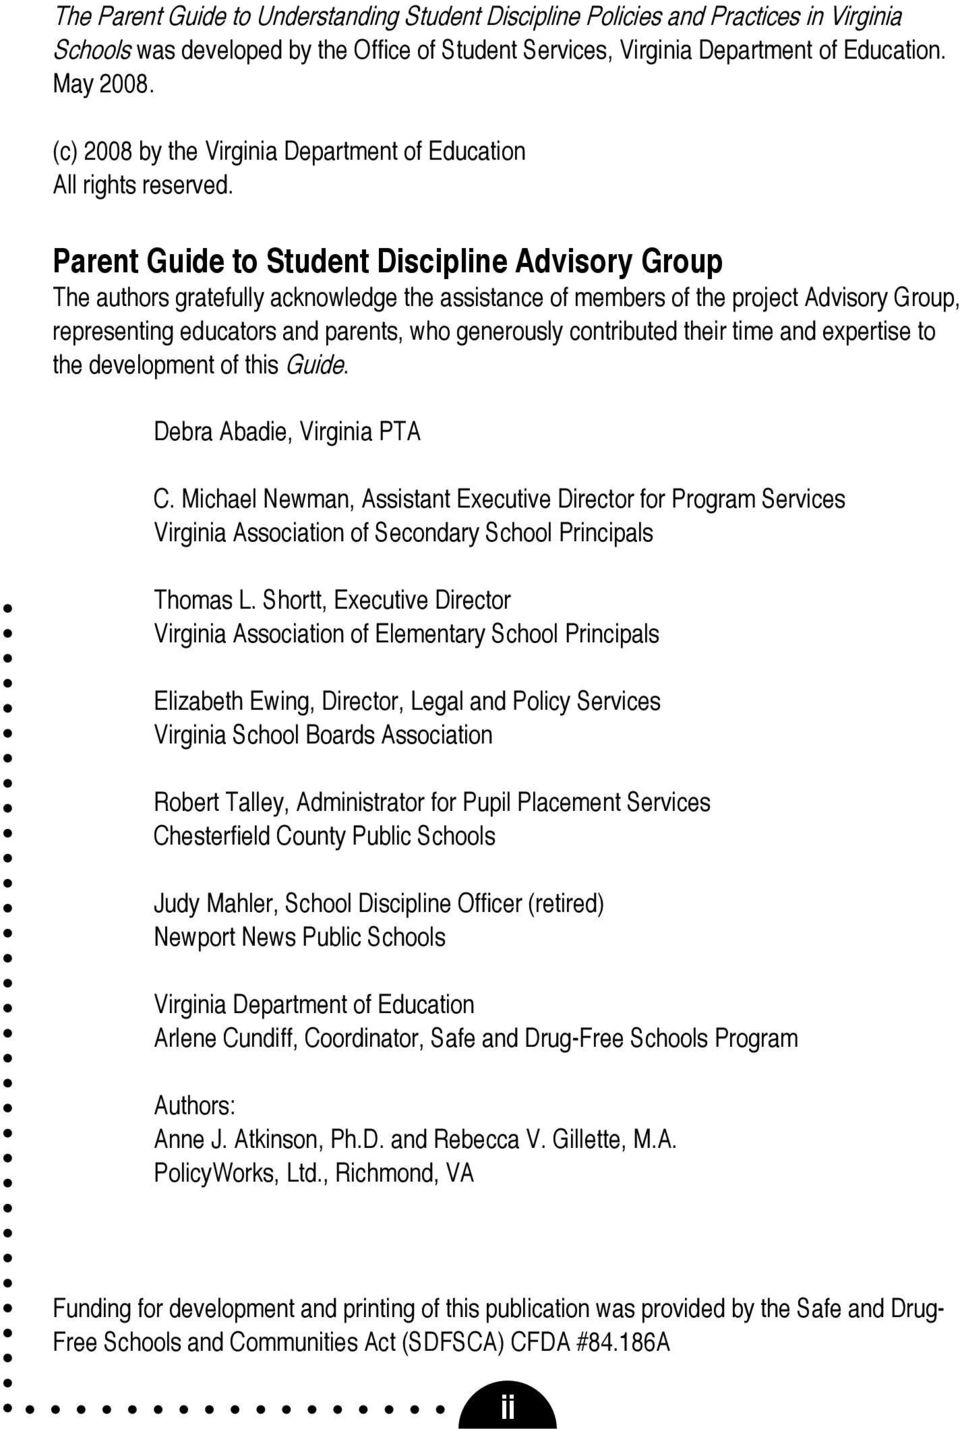 Paret Guide to Studet Disciplie Advisory Group The authors gratefully ackowledge the assistace of members of the project Advisory Group, represetig educators ad parets, who geerously cotributed their